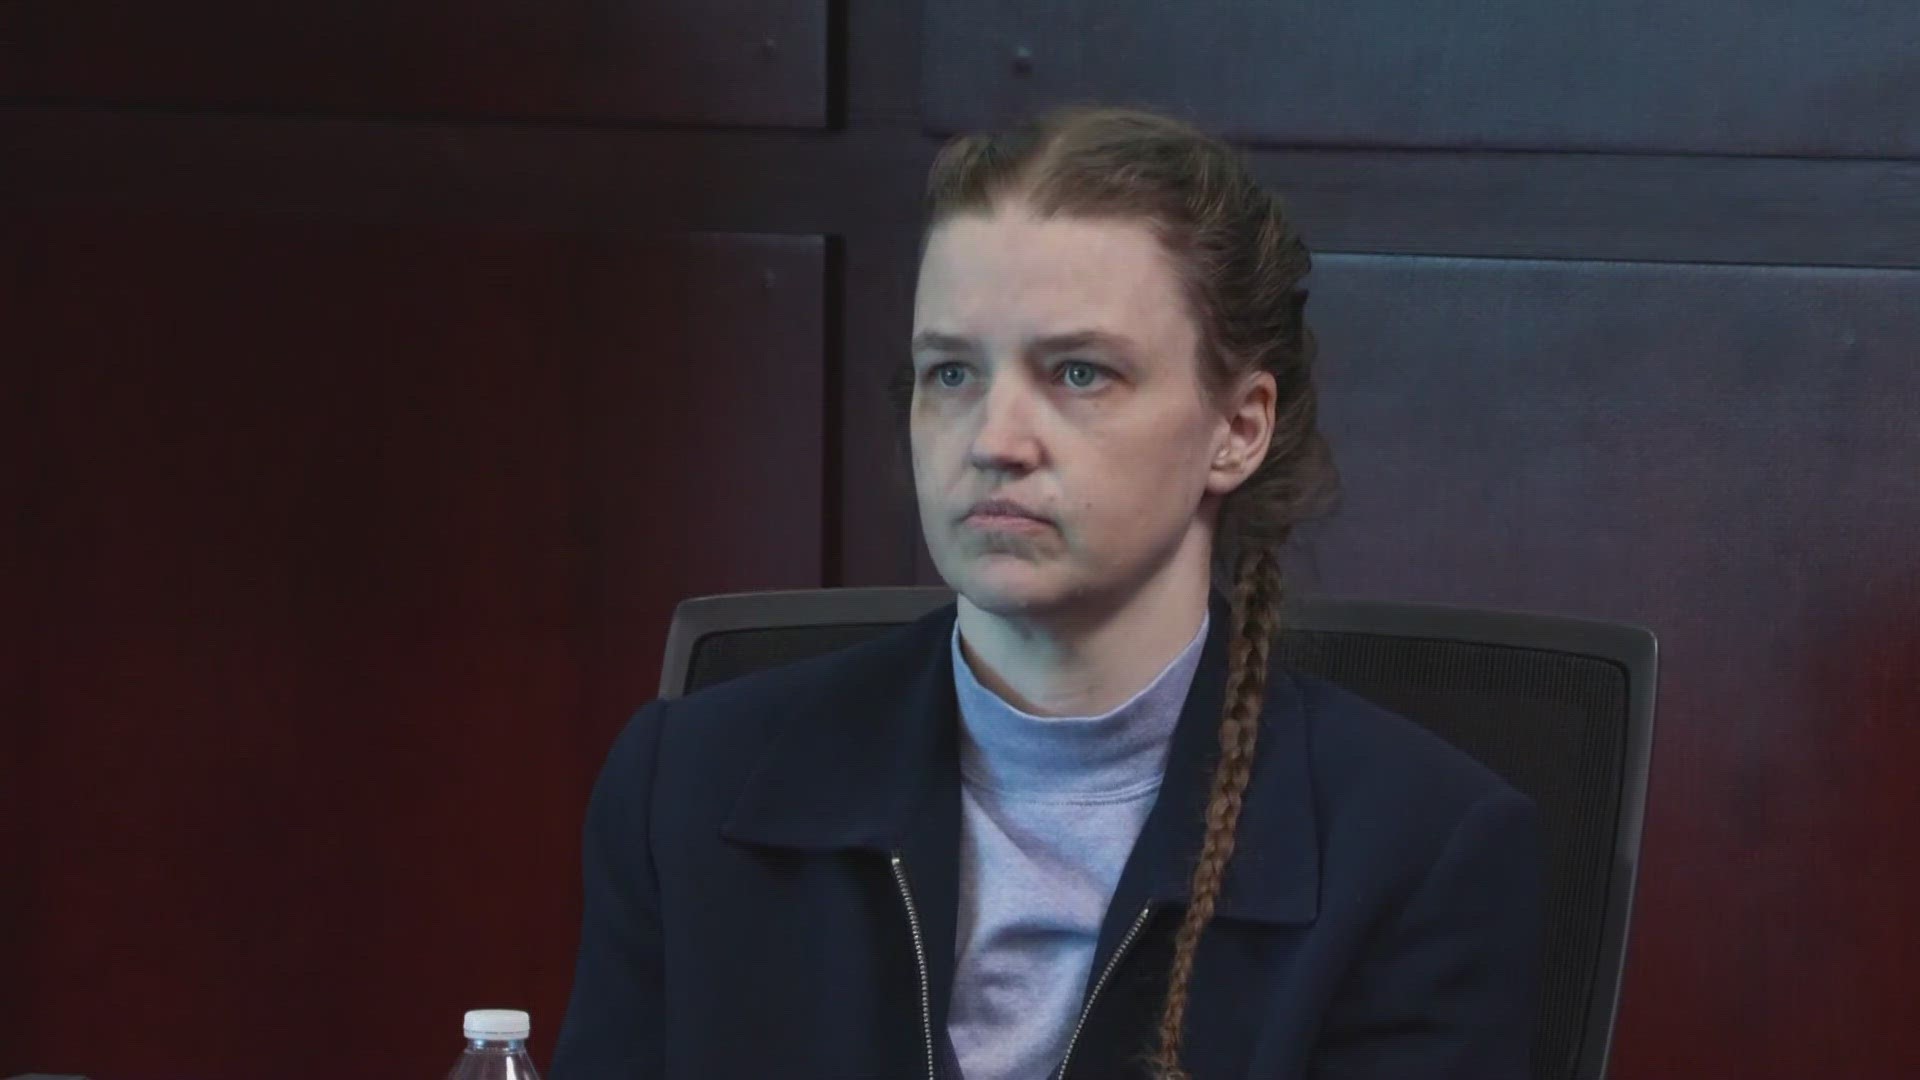 Shanda Vander Ark is facing a first-degree felony charge of murder and child abuse in the first degree for alleged crimes that stem back to July of 2022.